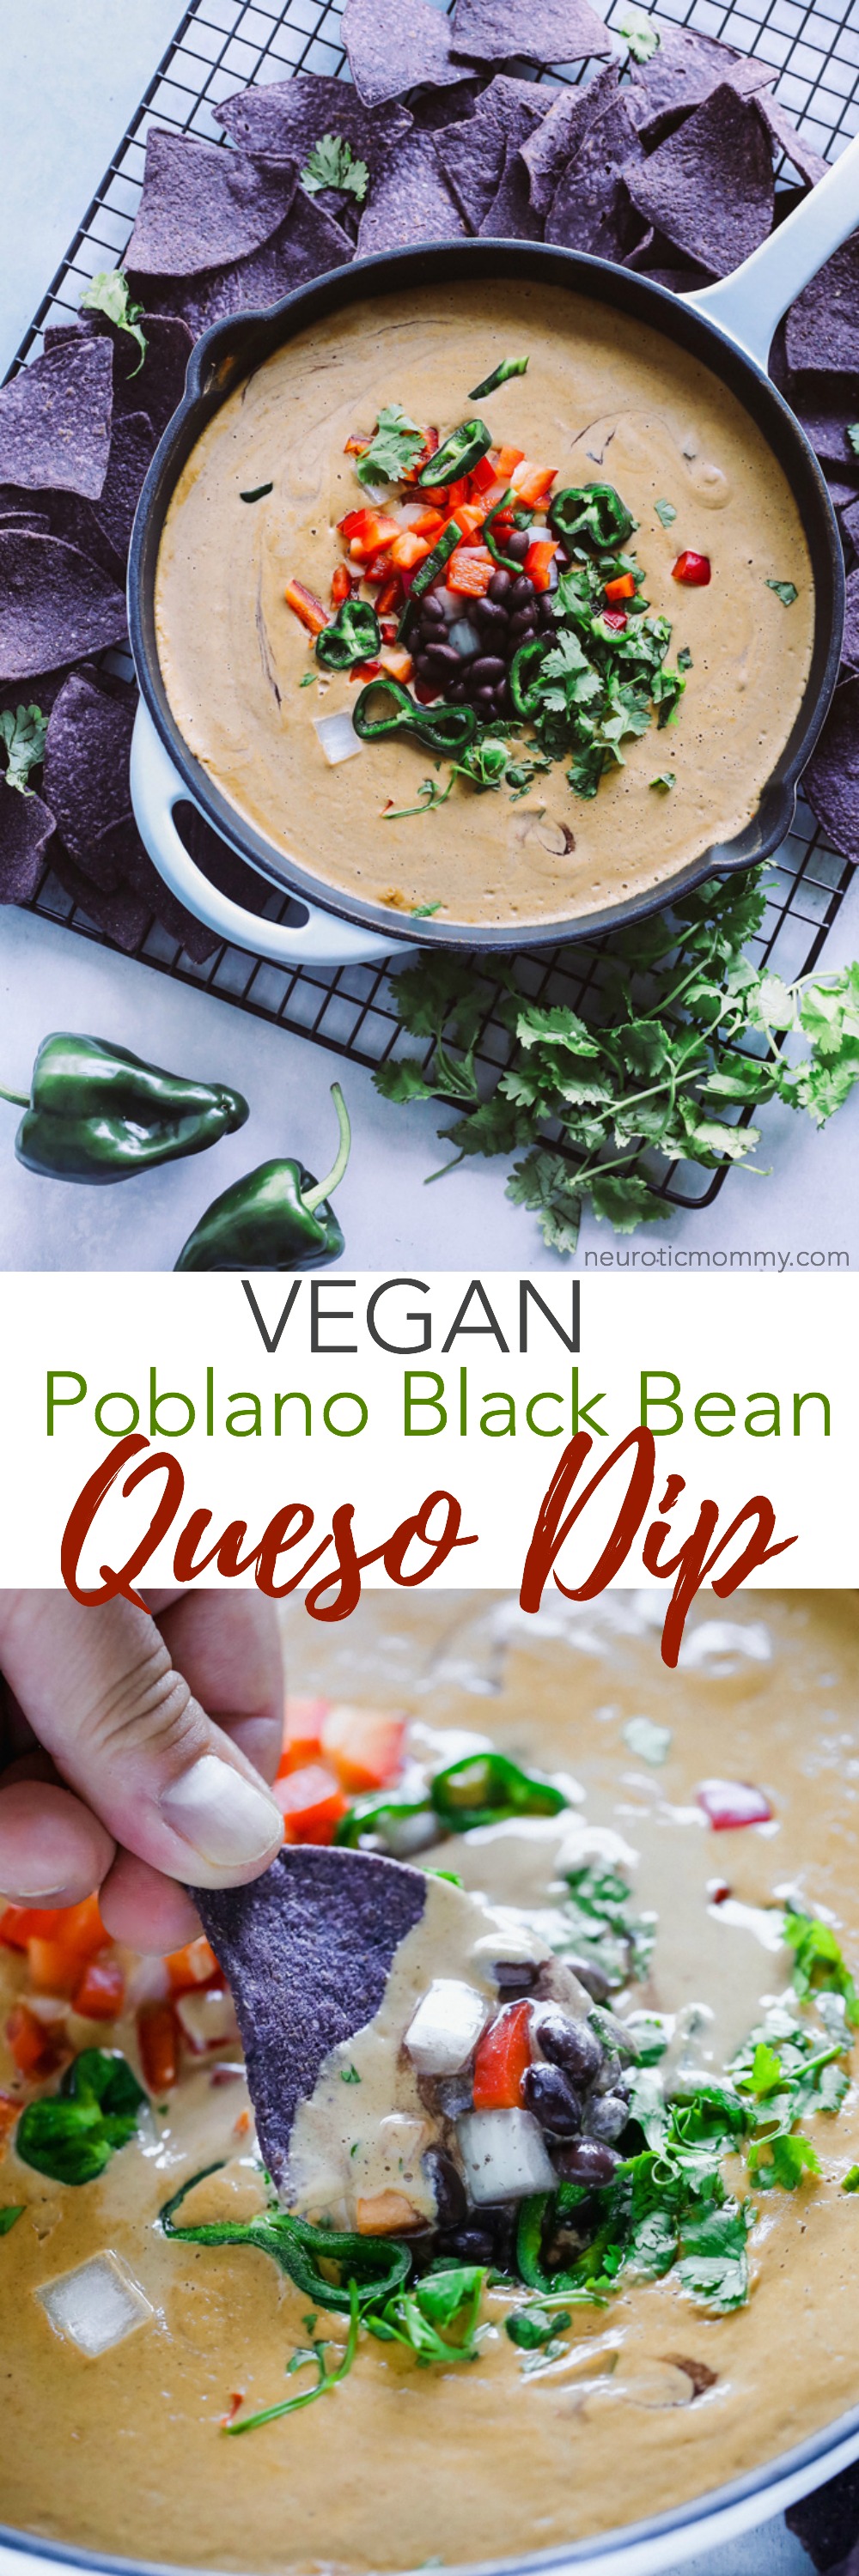 Vegan Poblano Black Bean Queso Dip is anything but basic. Loaded with all sorts of fresh goodness turned into a creamy, melty, luscious cheese dip perfect for all your dunking needs. NeuroticMommy.com #veganqueso #dip